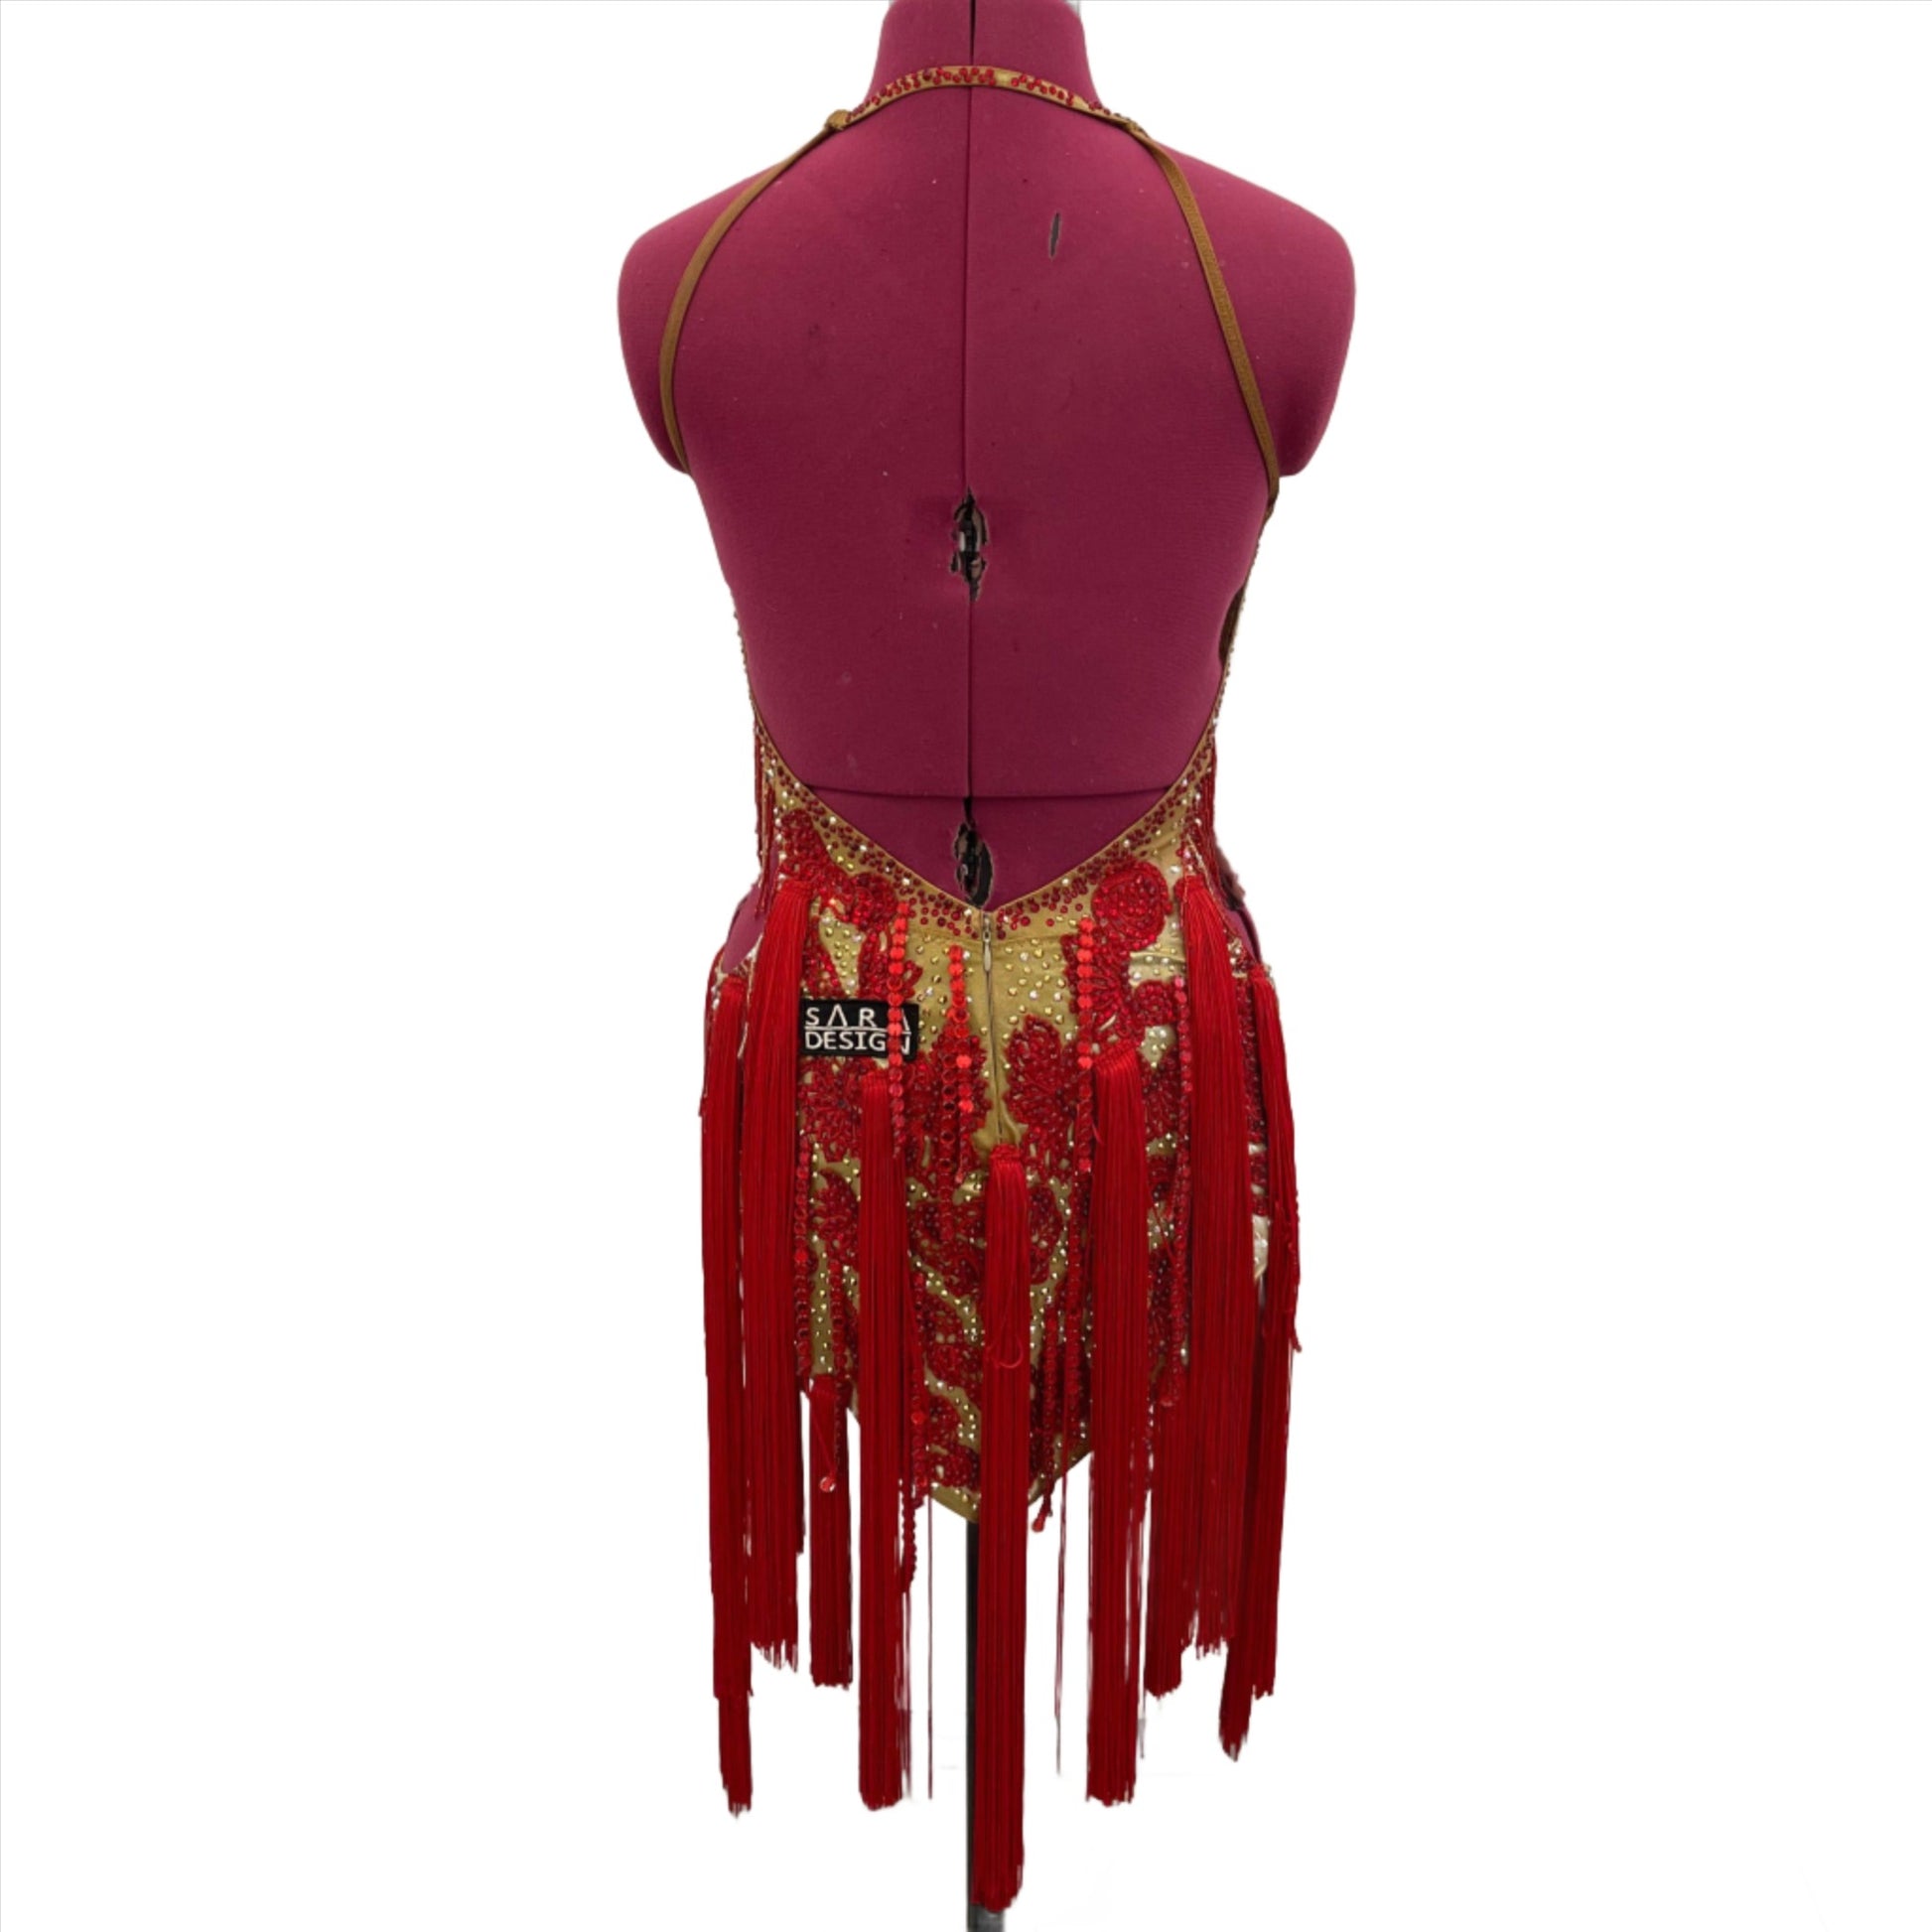 Gold and Vibrant Red Fringe Latin Dance Dress, Stunning gold and red fringe Latin dance dress adorned with crystals - perfect for competitions and performances. Shop now for exquisite dancewear at our online store.